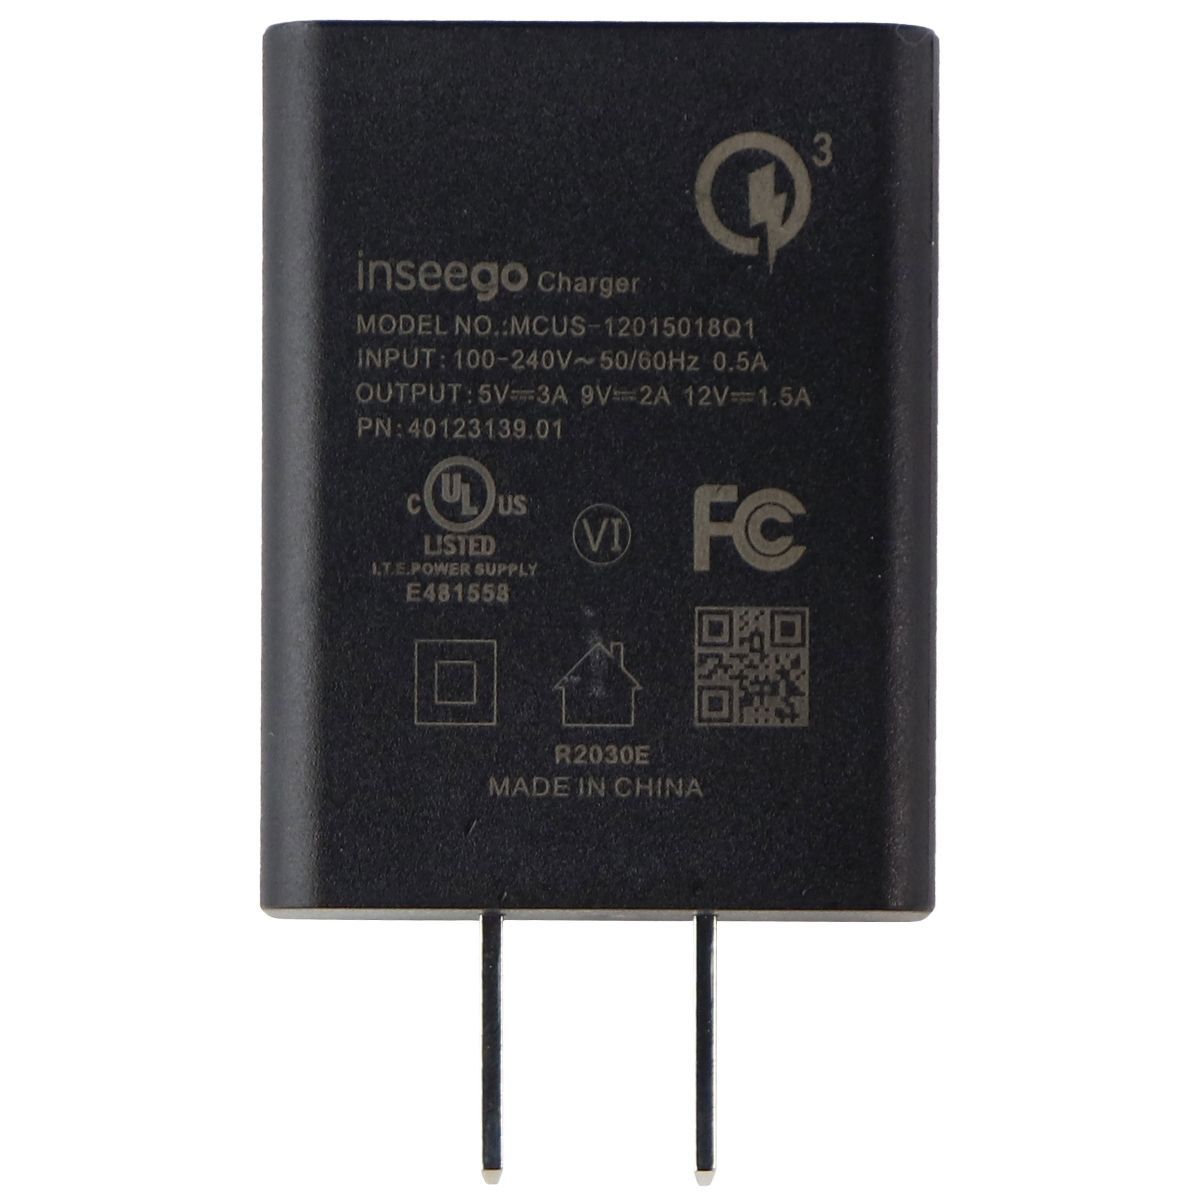 Inseego QuickCharge 3.0 Single USB Wall Charger/Adapter - Black MCUS-12015018Q1